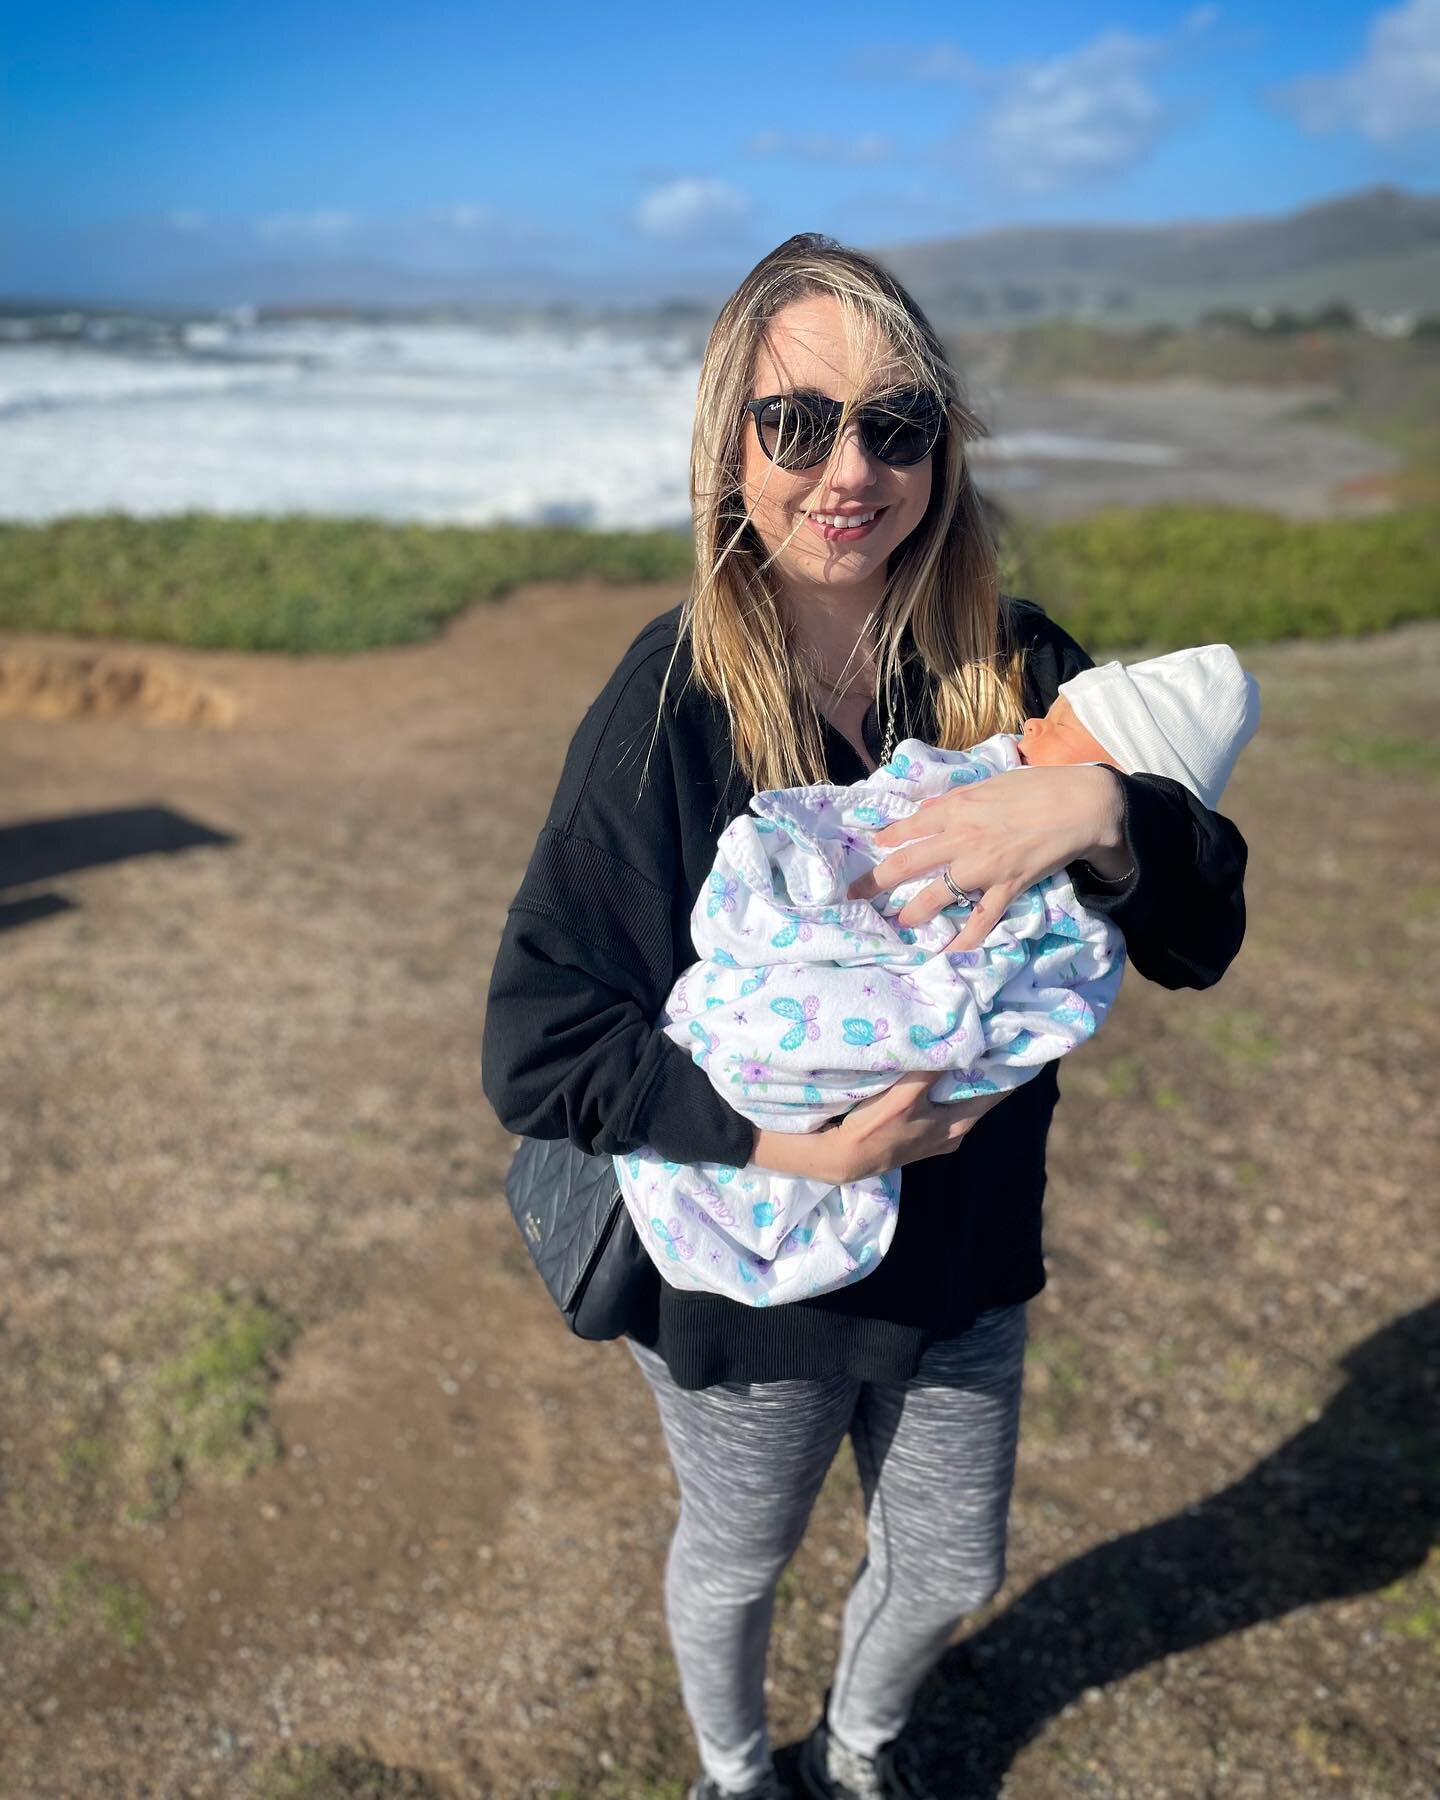 Olivia&rsquo;s first beach trip today - our favorite place. Only lasted about 2.5 seconds due to the wind, but it was a nice quick outing for mama and papa 🌊☀️🦋